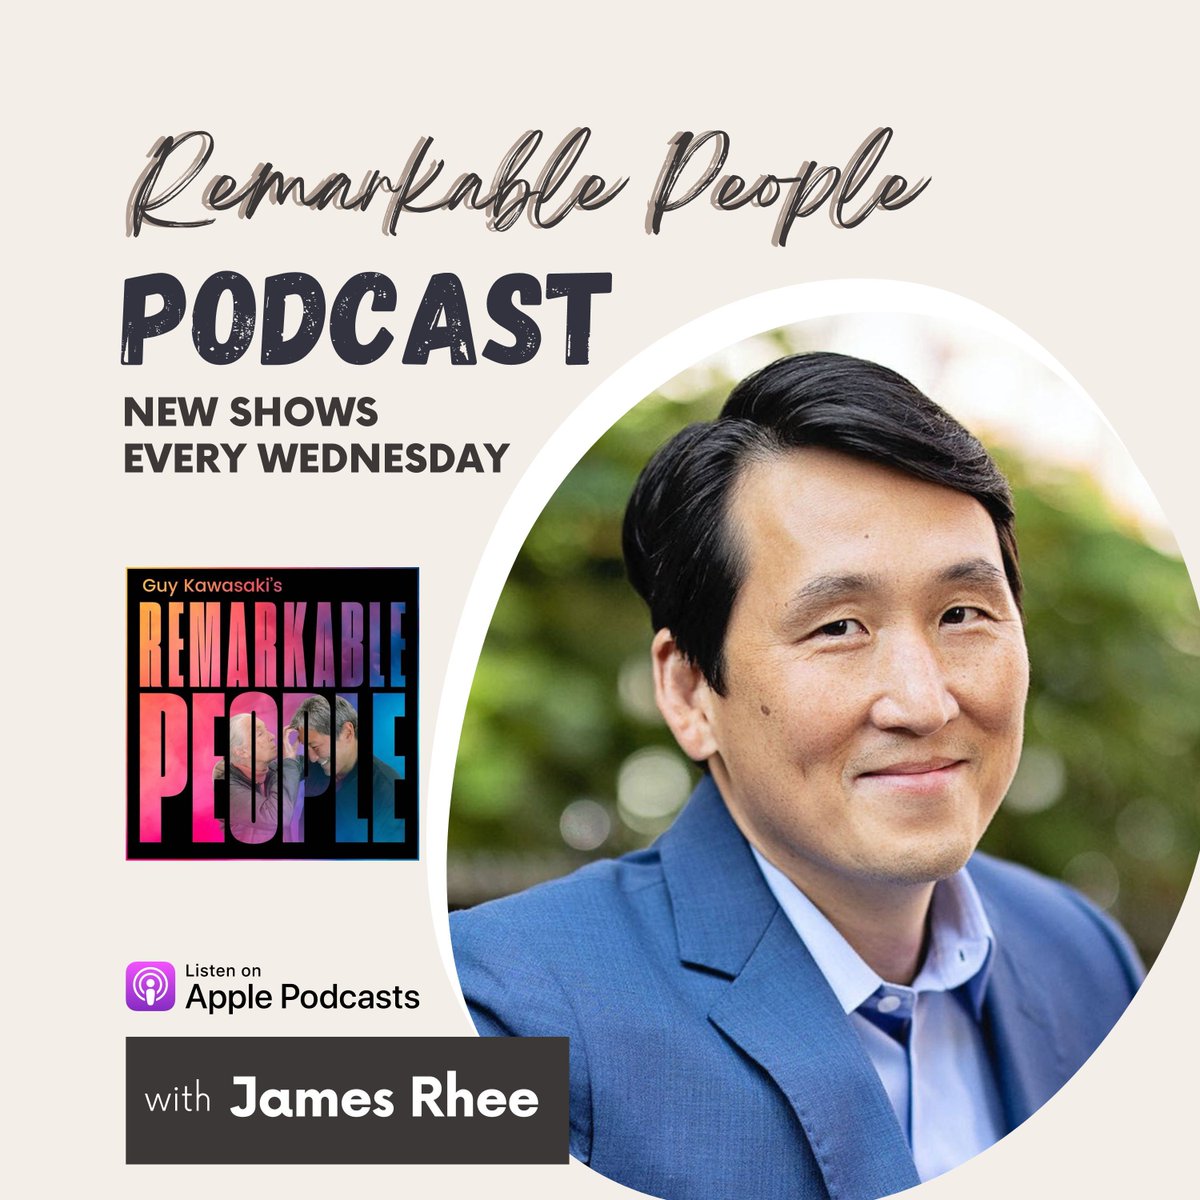 🎧 Tune in to this week's Remarkable People episode with James Rhee! Learn about his transformative leadership approach from his book 'Red Helicopter.' Listen now: bit.ly/3UaASYH